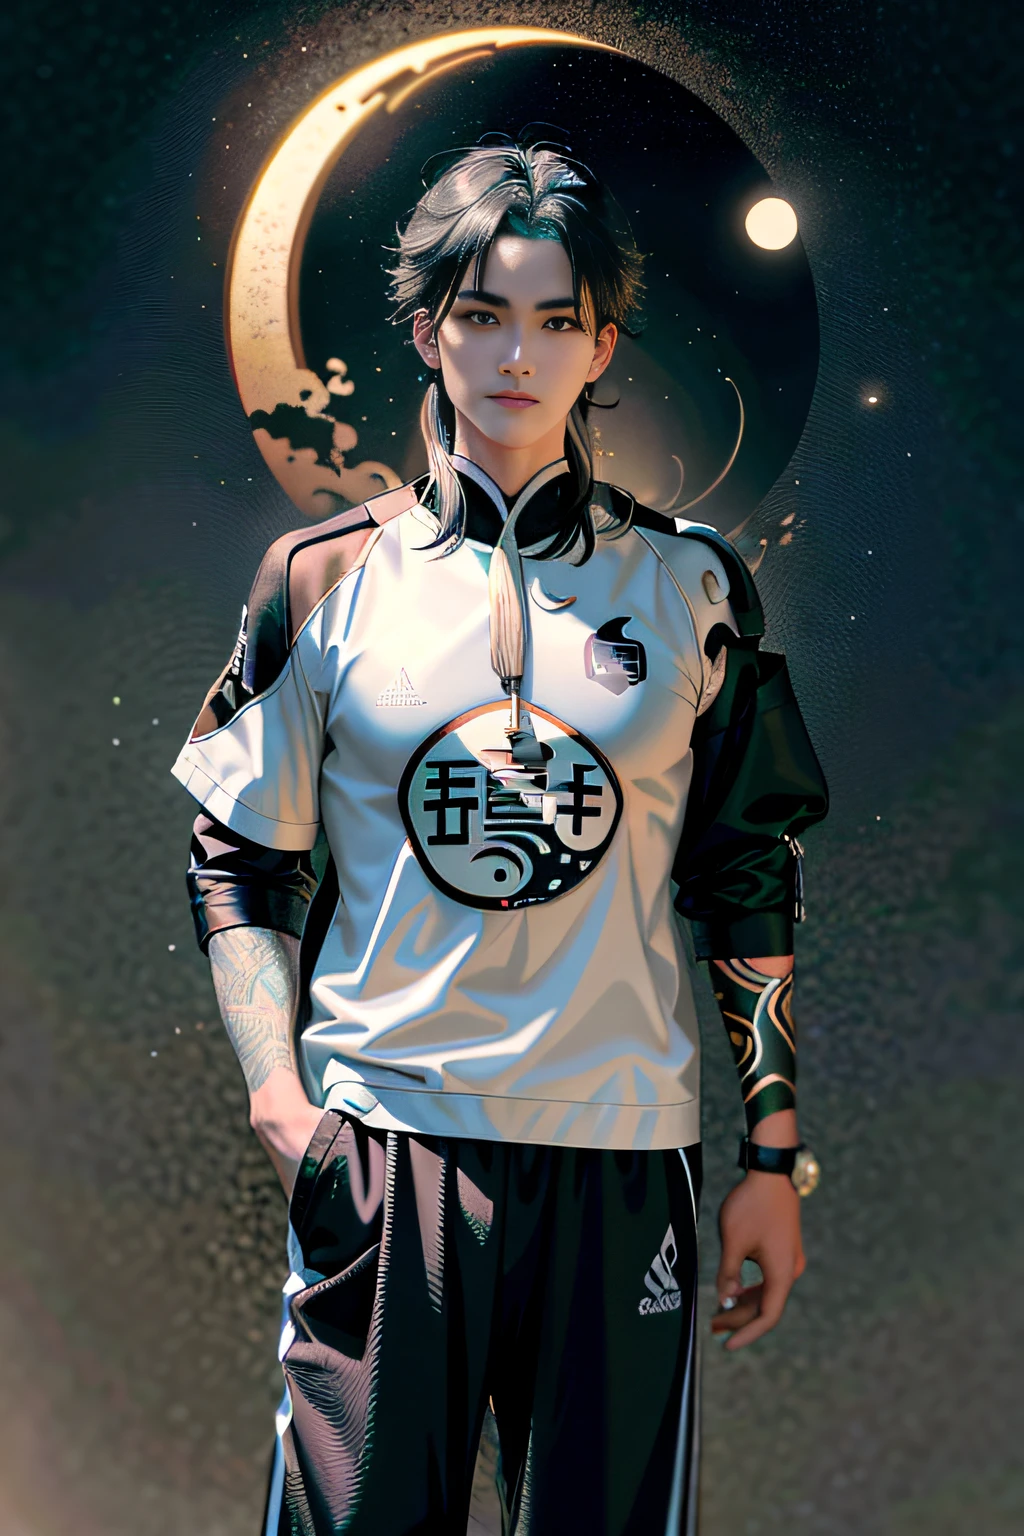 There was a man with tattoos on his arms and shirt, inspired by Fan Qi, in the style of sifu 🔥 😎 🕹️ 👀 :2, lunar themed attire, inspired by Liao Chi-chun, inspired by Wu Bin, inspired by Itō Ogura Yonesuke, Inspired by Gong Li, Inspired by Gong Xian's fantasy starry sky，Tai Chi gossip，yin yang，Handsome boy，Modern attire，sport outfit，The face is calm，See through everything，modern urban，modern day，Eyes are normal